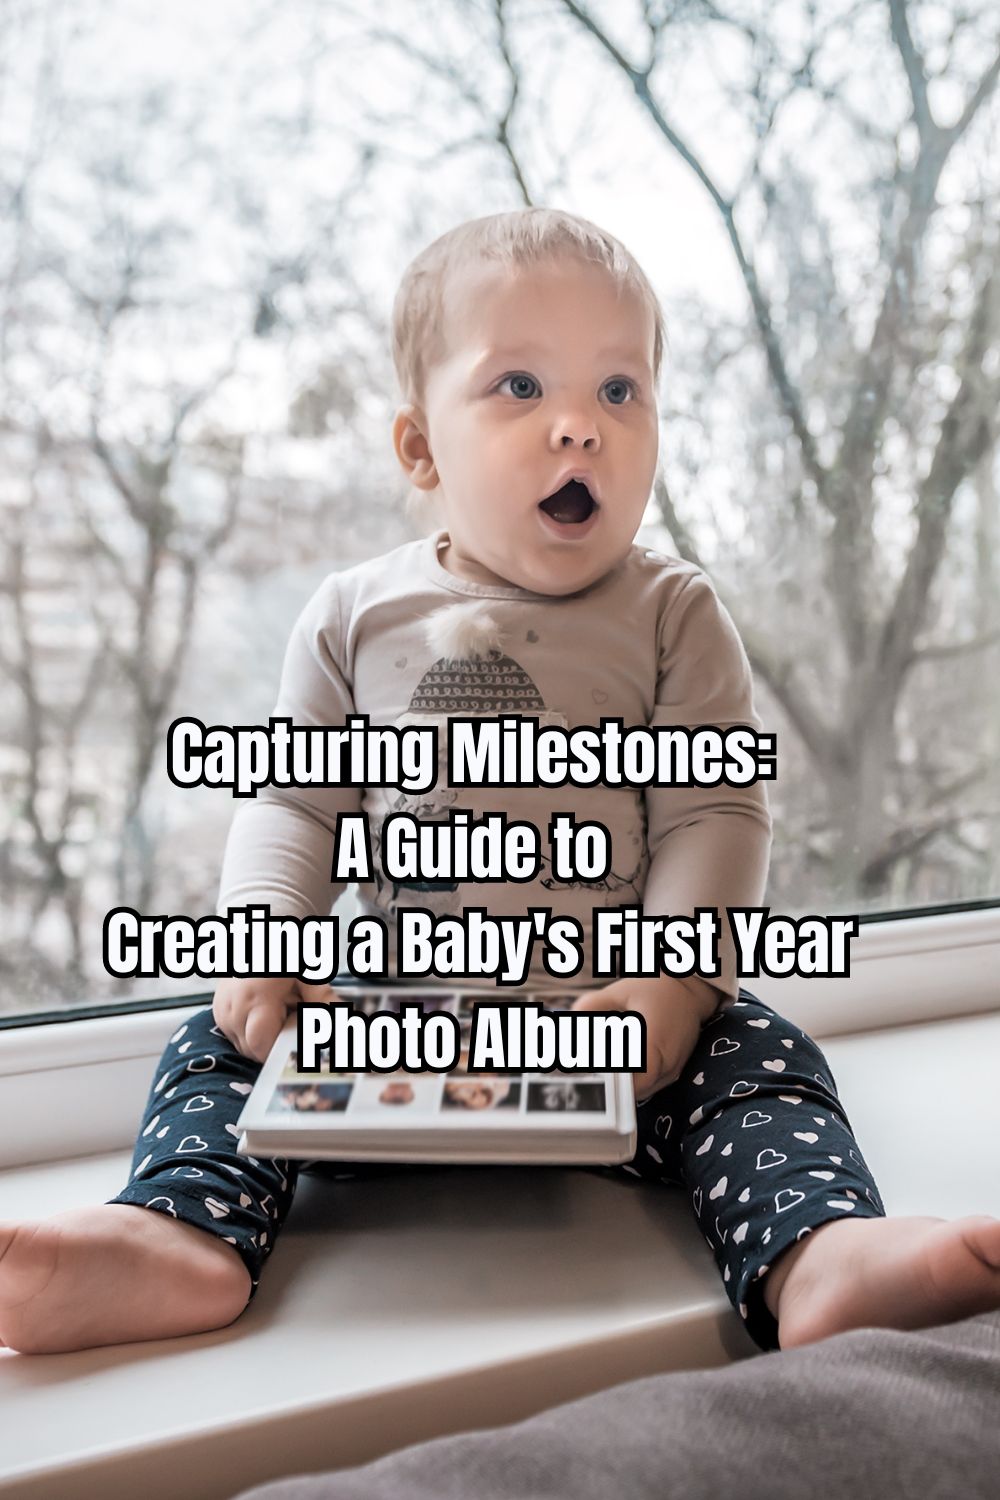 Capturing Milestones A Guide to Creating a Baby's First Year Photo Album